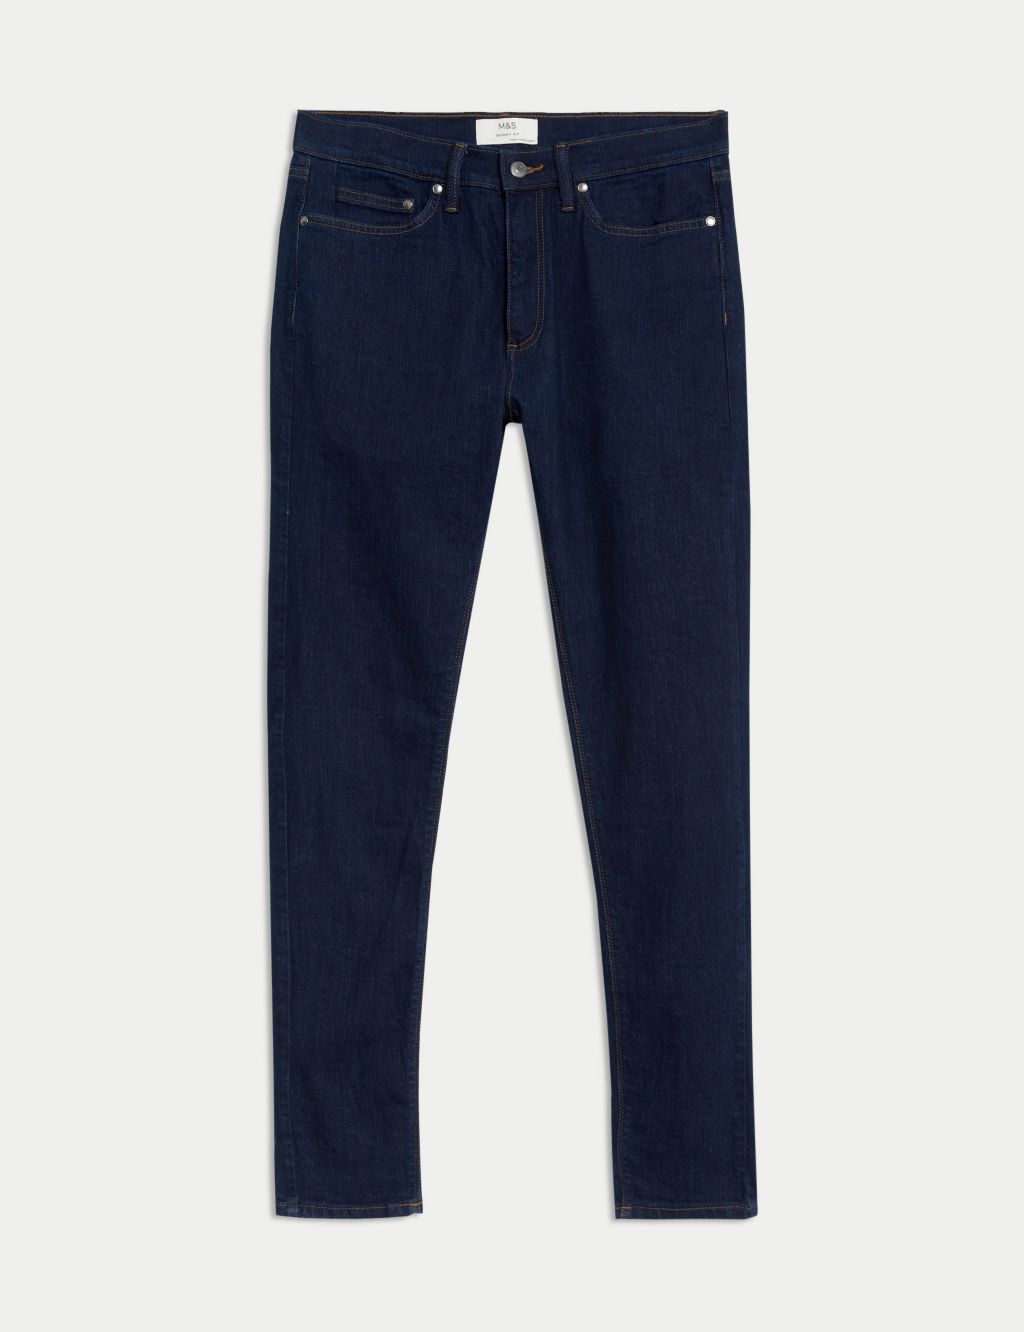 Skinny Fit Stretch Jeans image 2